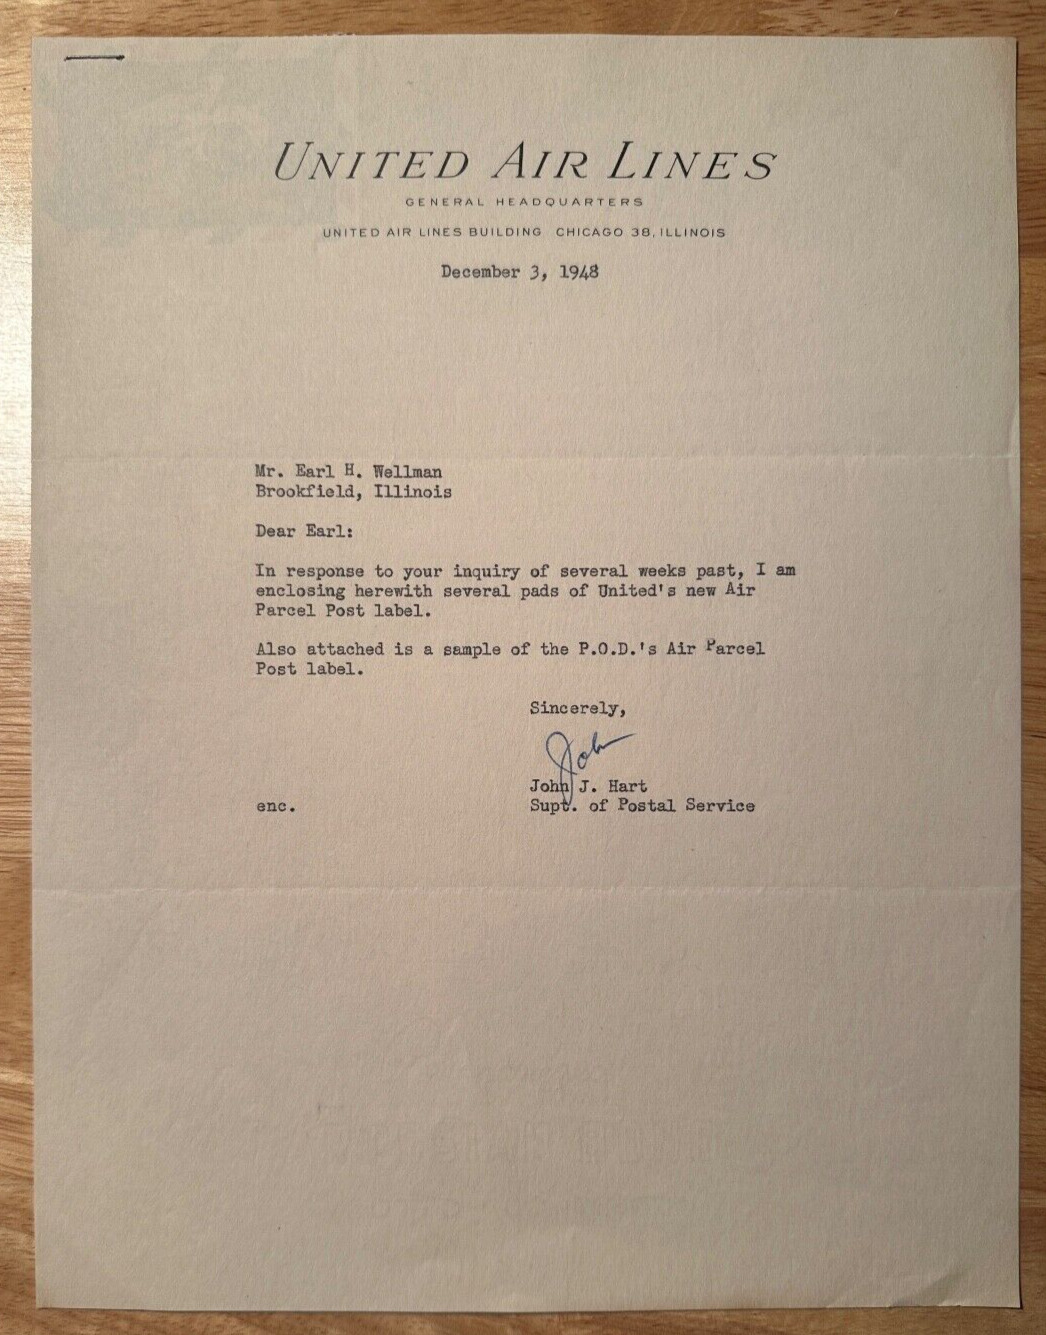 United Air Lines - 1948 Chicago, Illinois vintage business letter